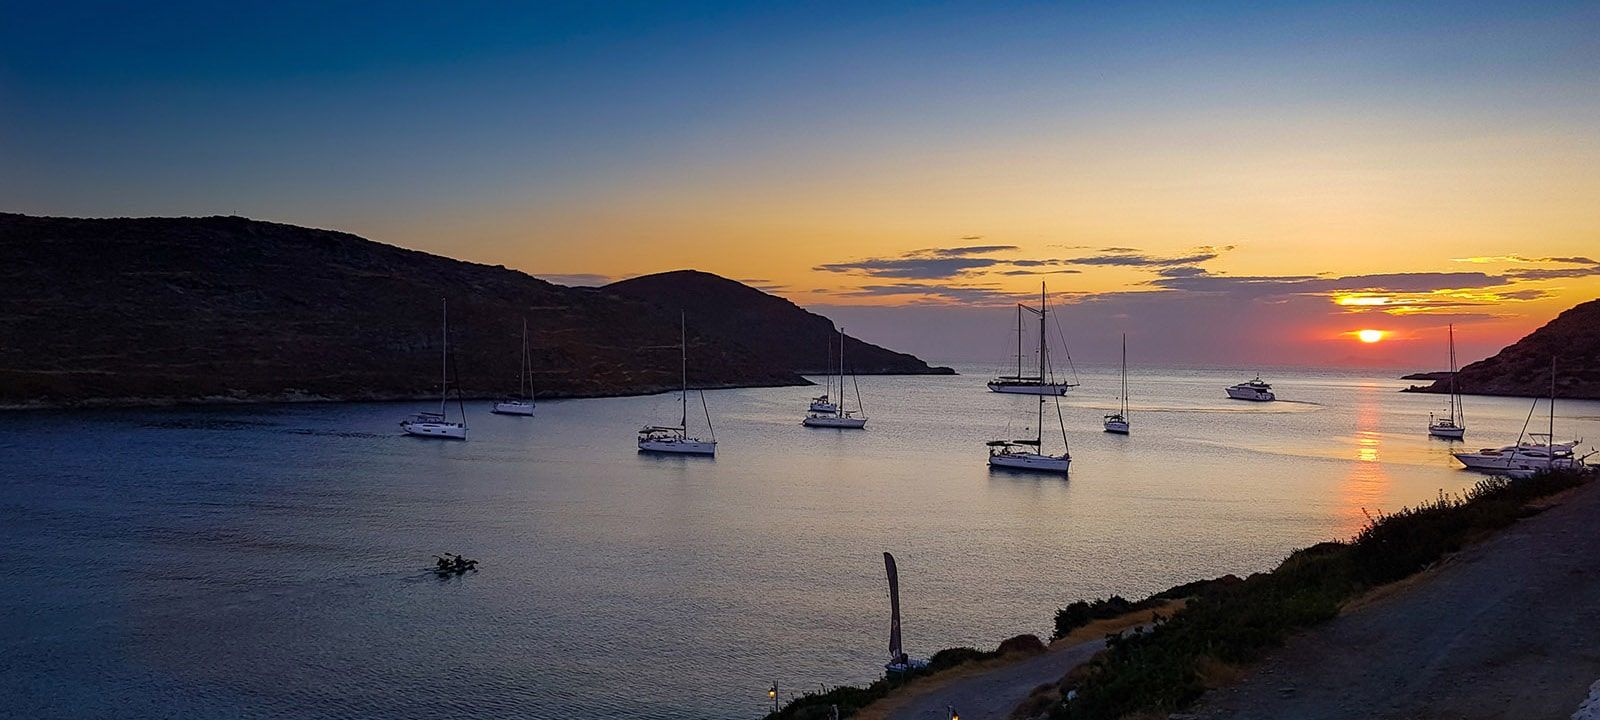 The destination of Kythnos for a trip with Greek Adventures